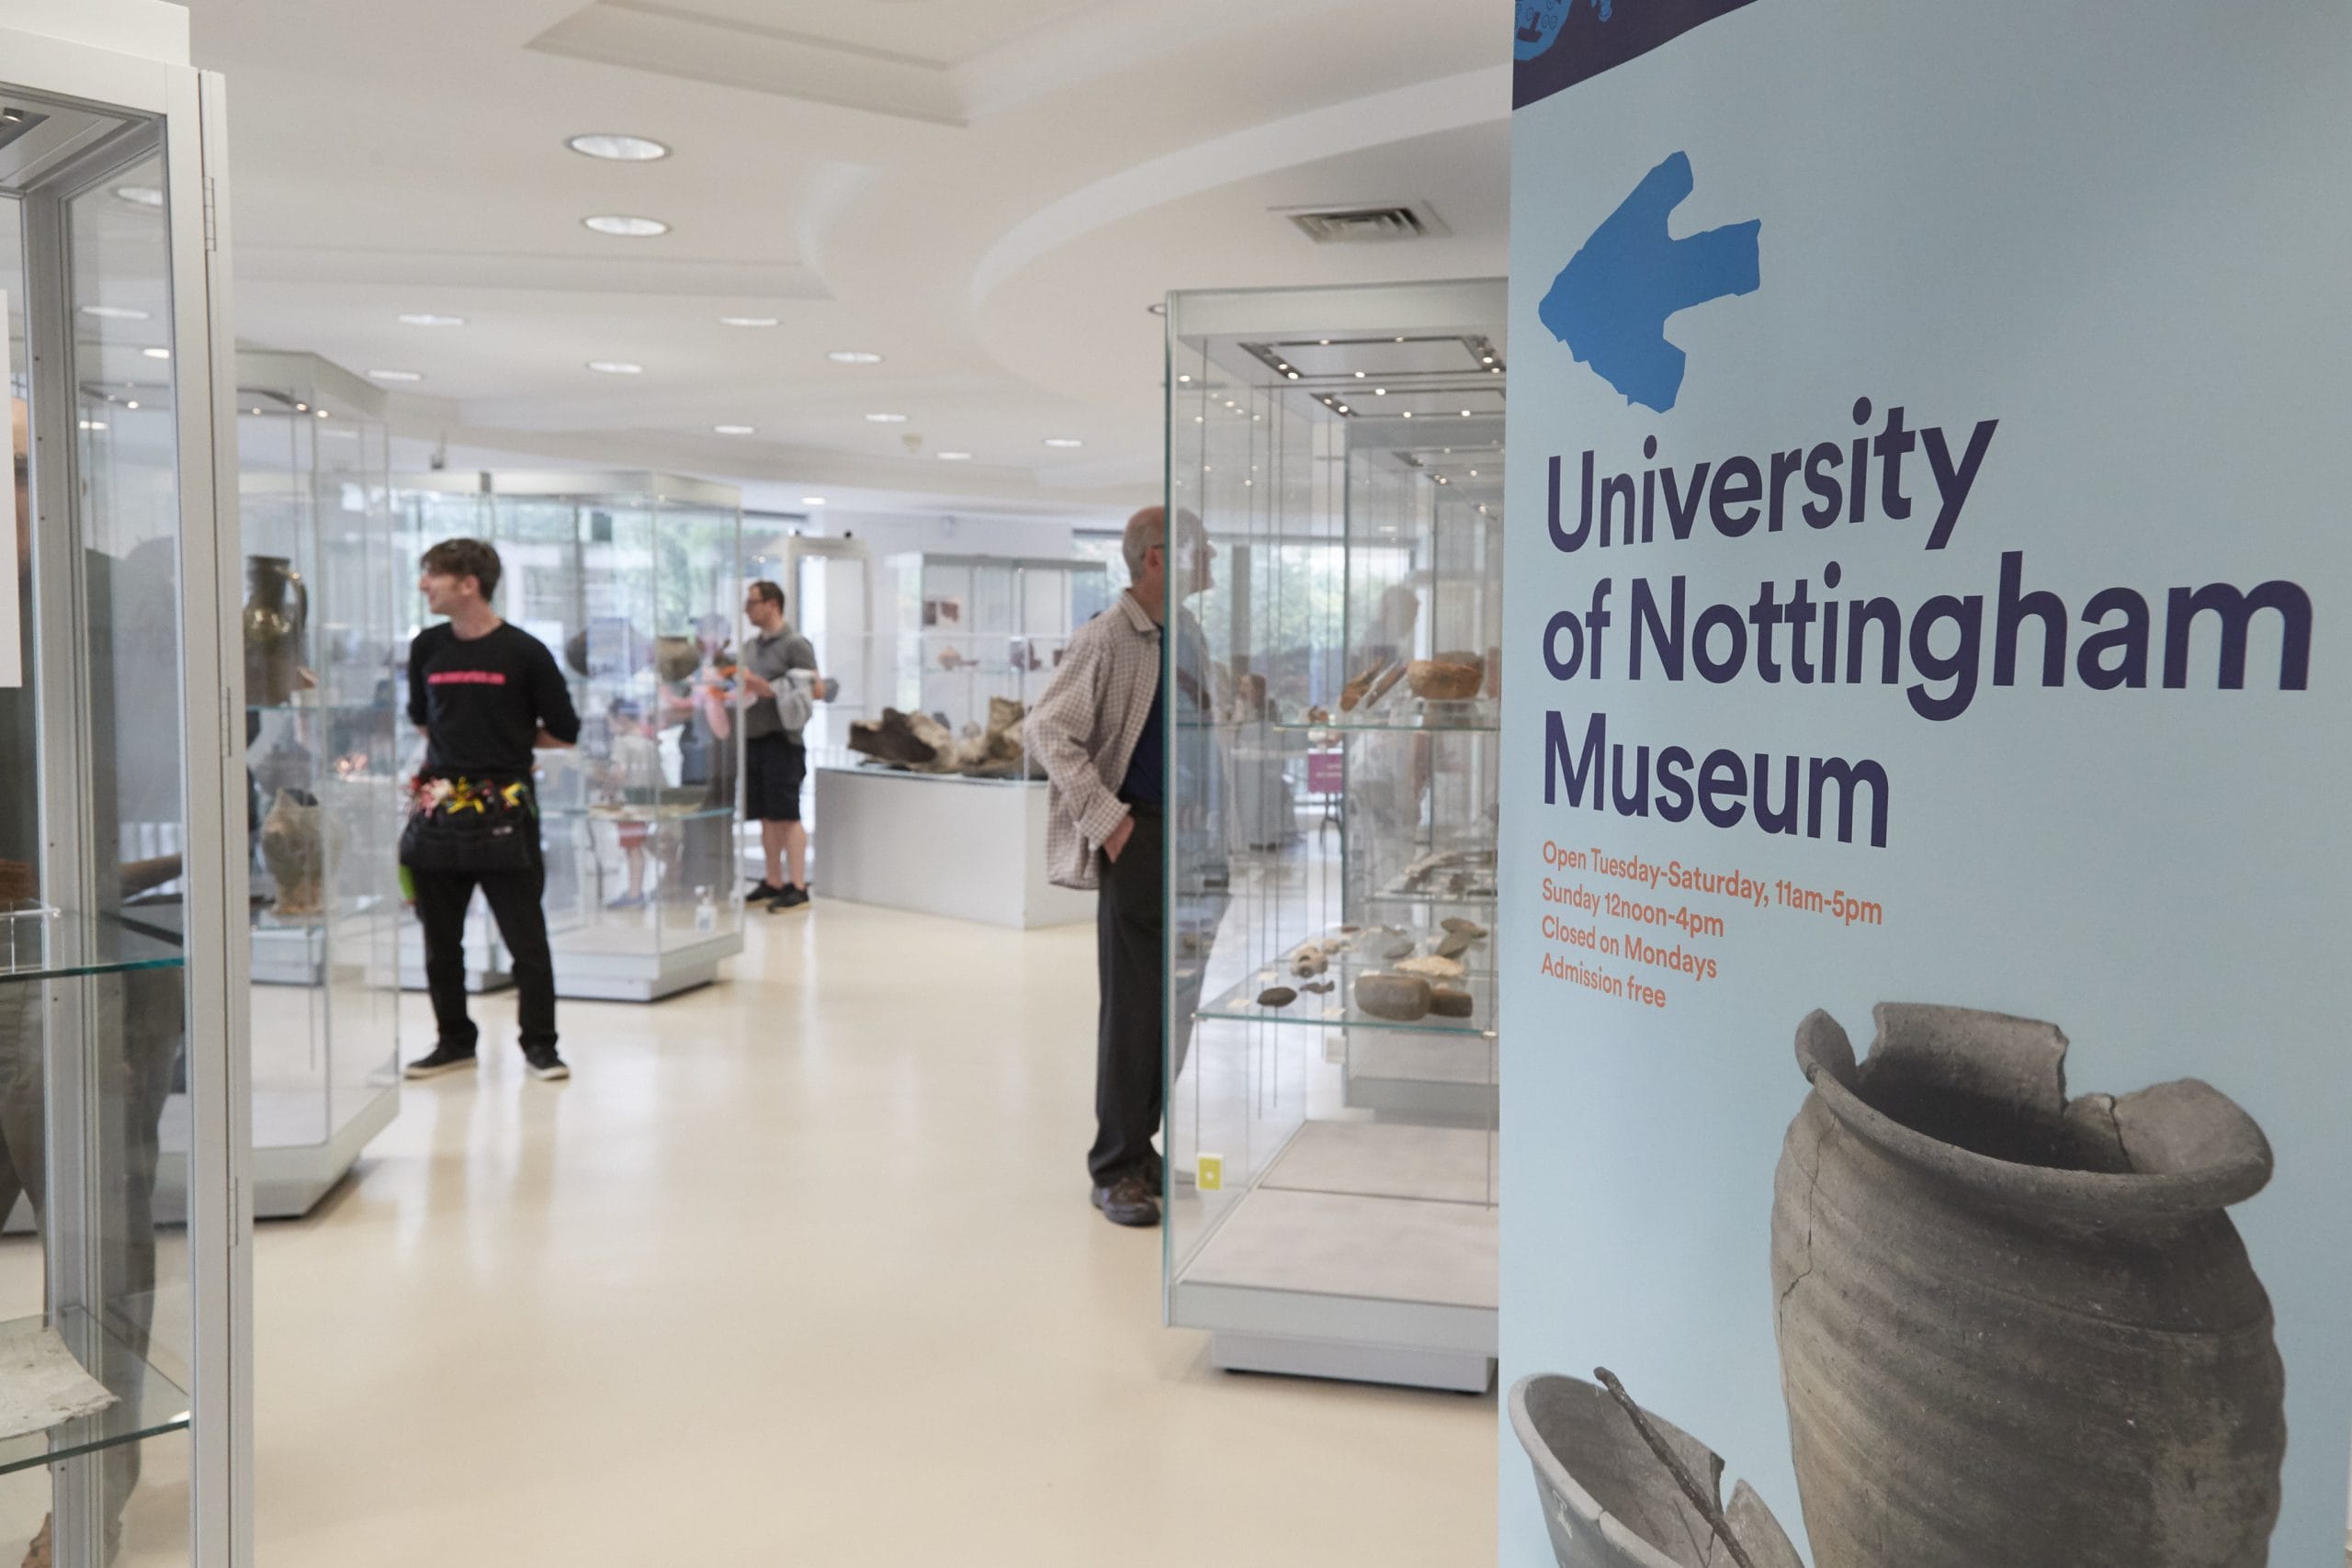 People are admiring artefacts in University of Nottingham Museum